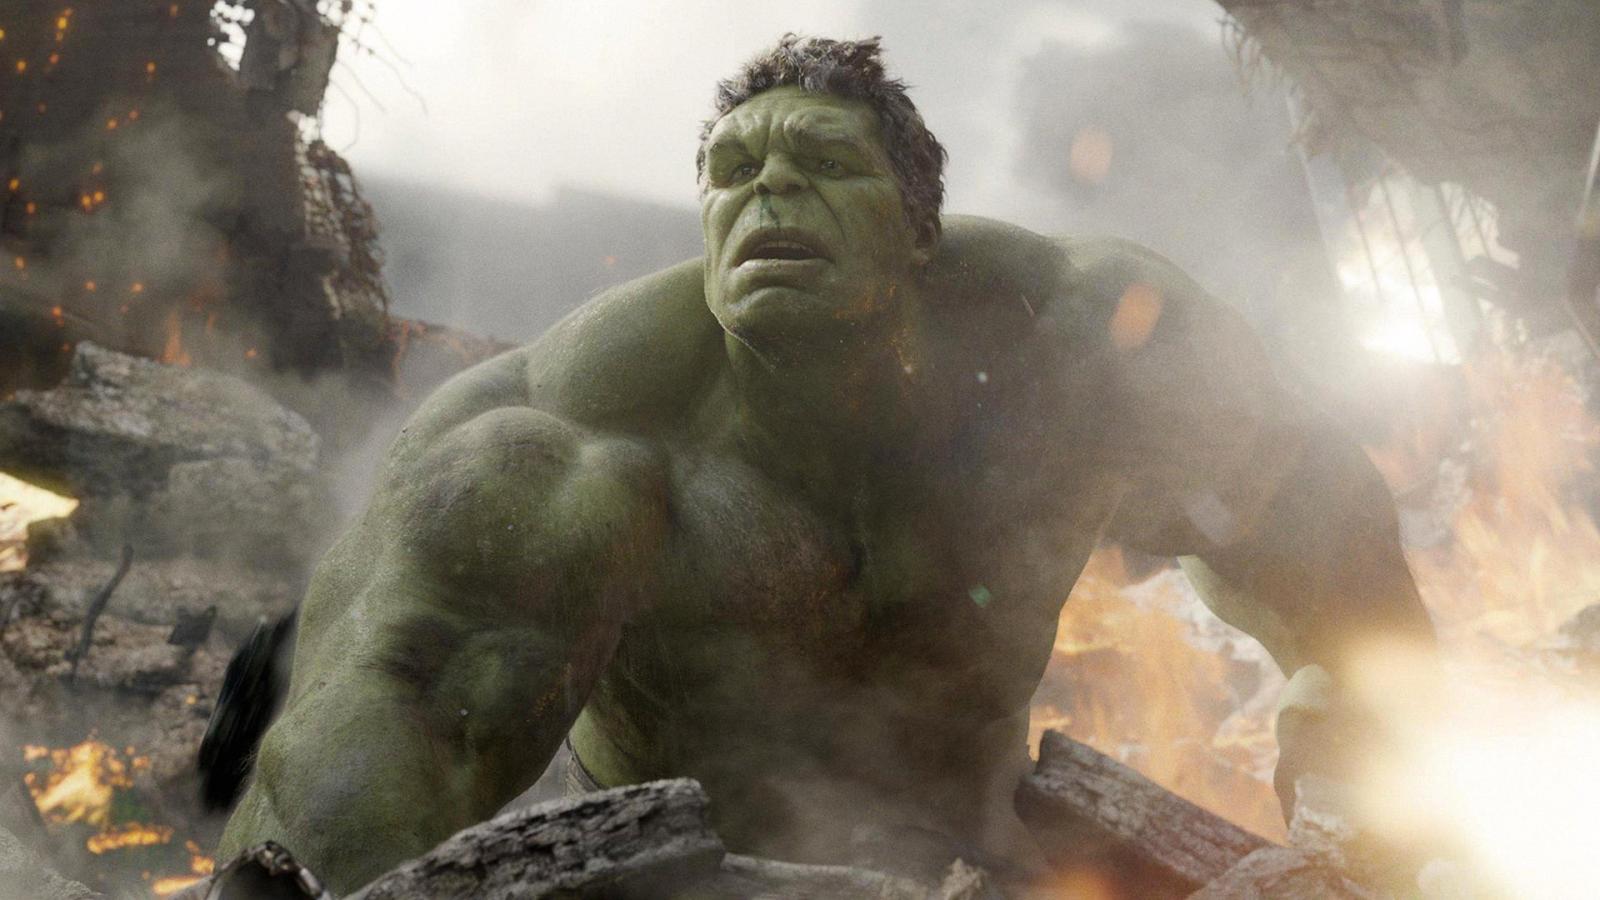 10 Most Expensive CGI Characters in Live-Action Movies That Cost a Fortune to Create - image 5